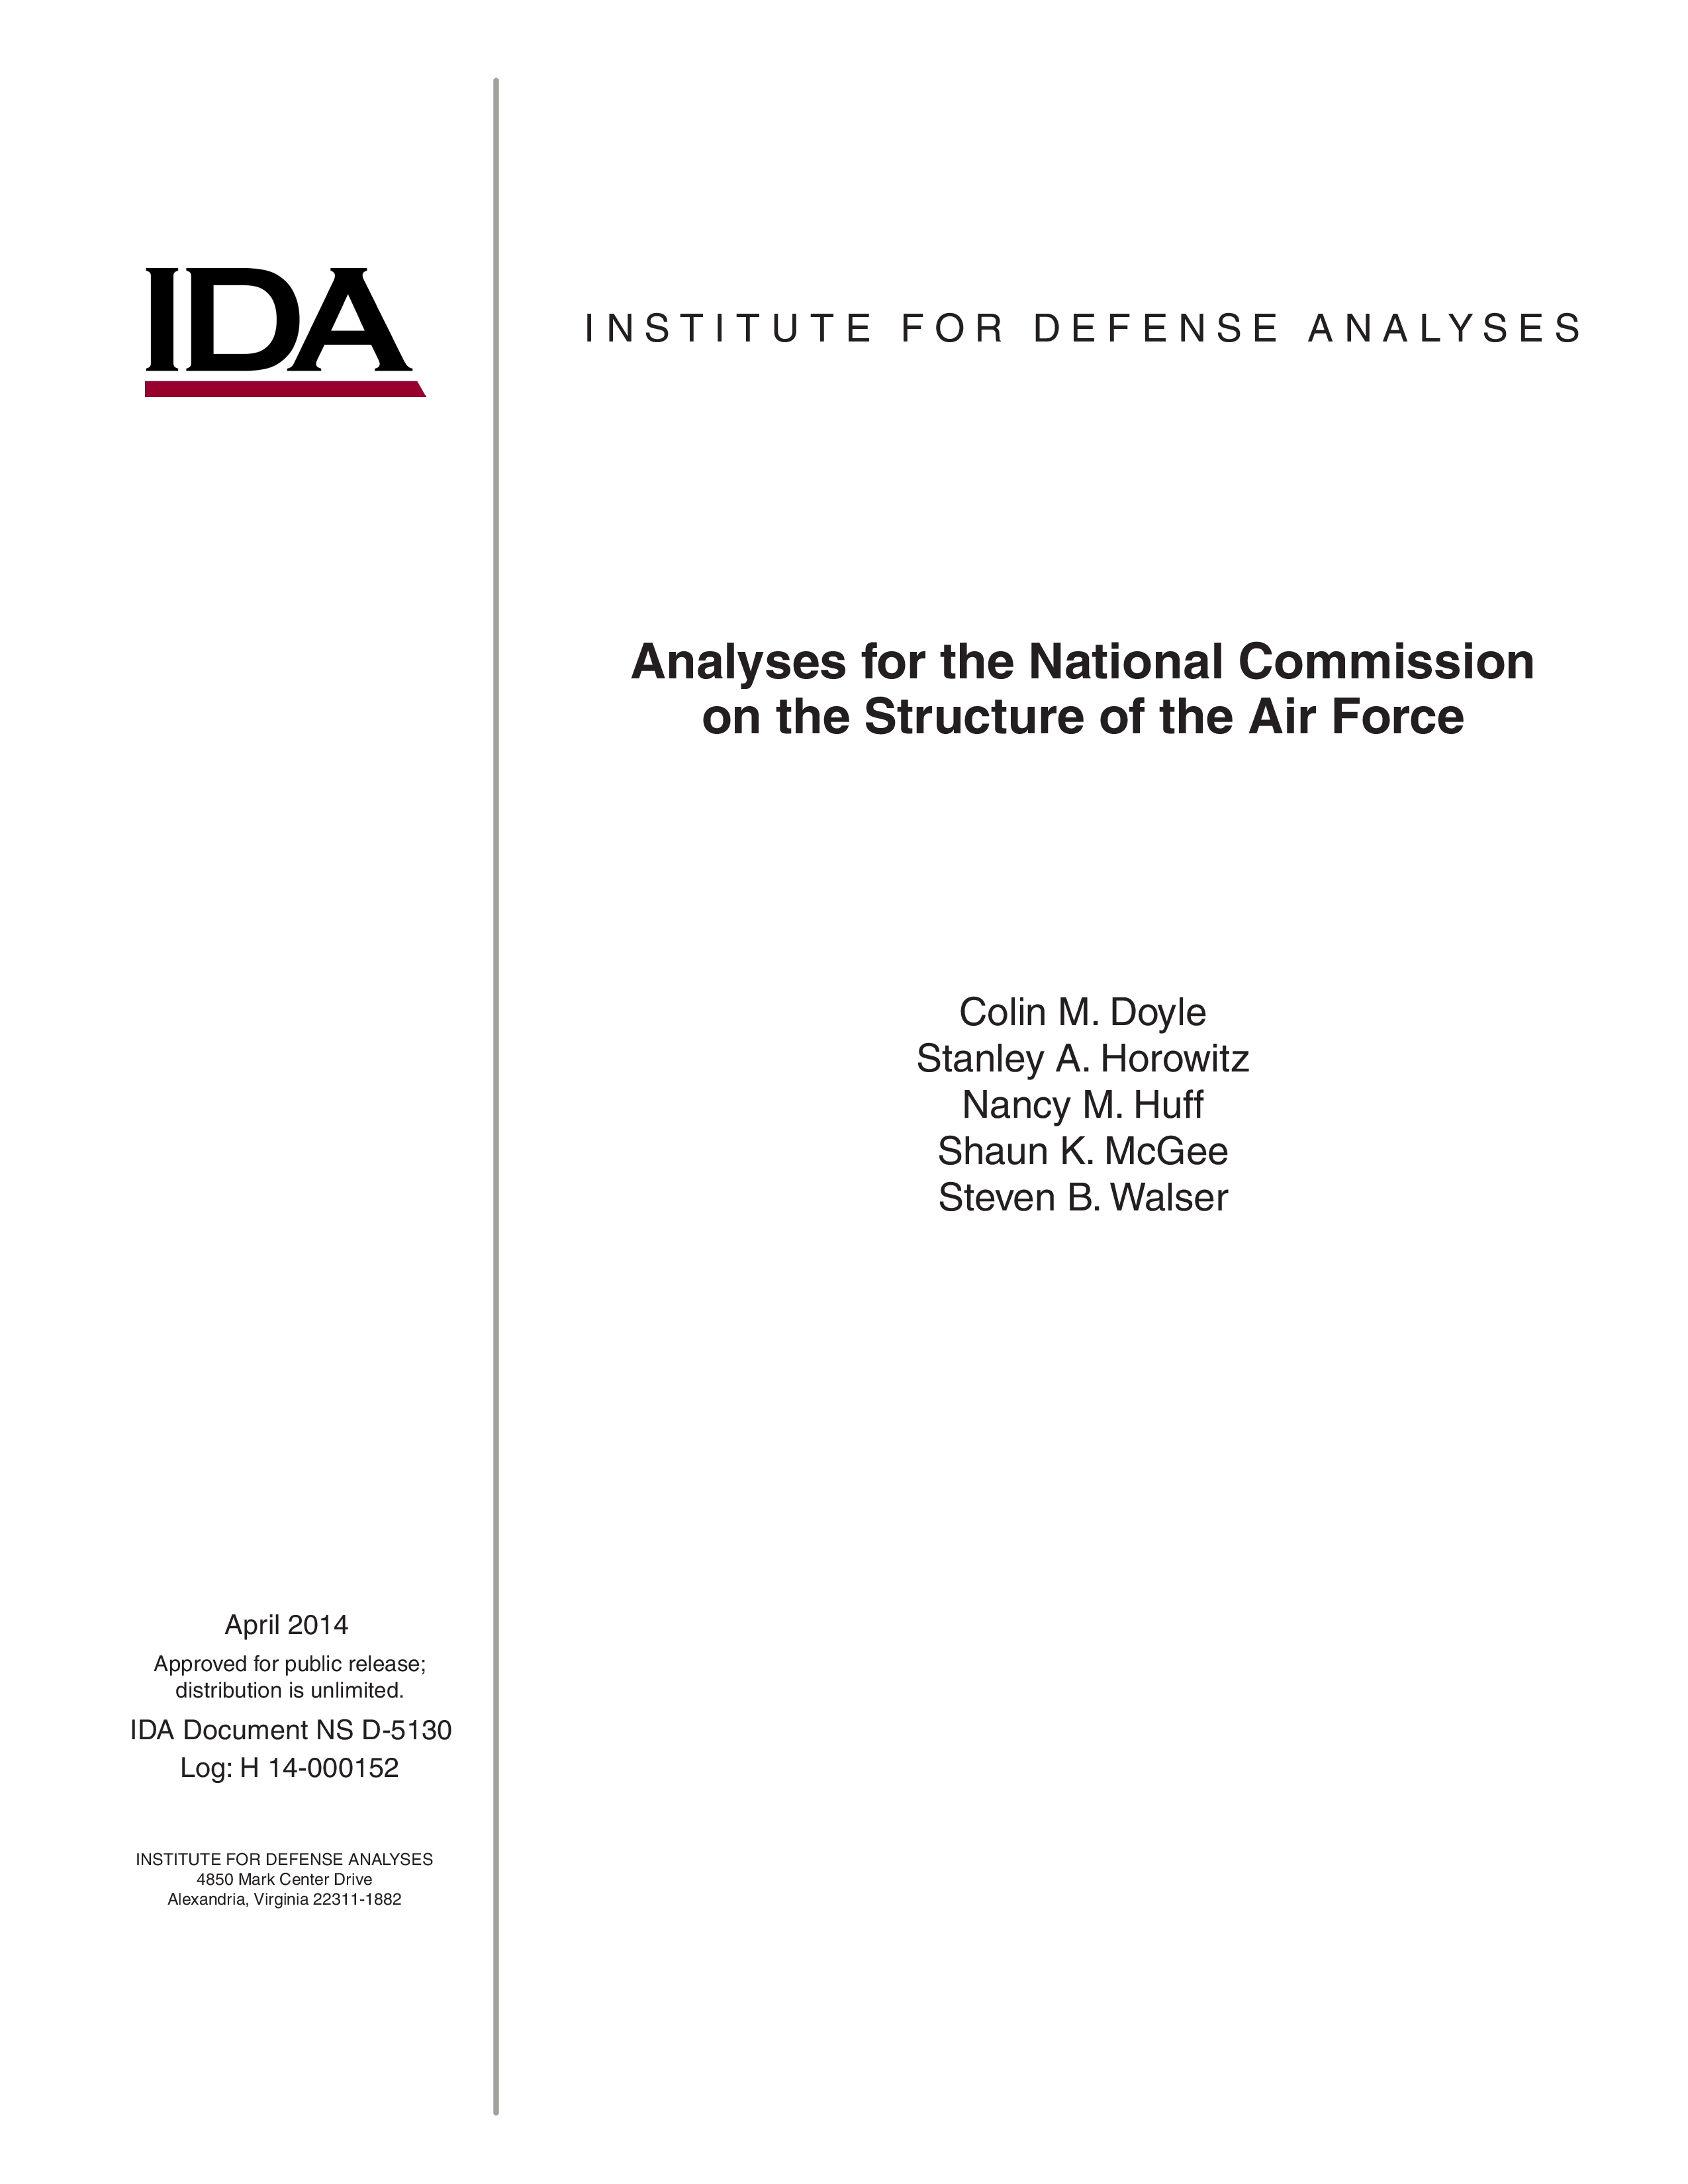 Analyses for the National Commission on the Structure of the Air Force